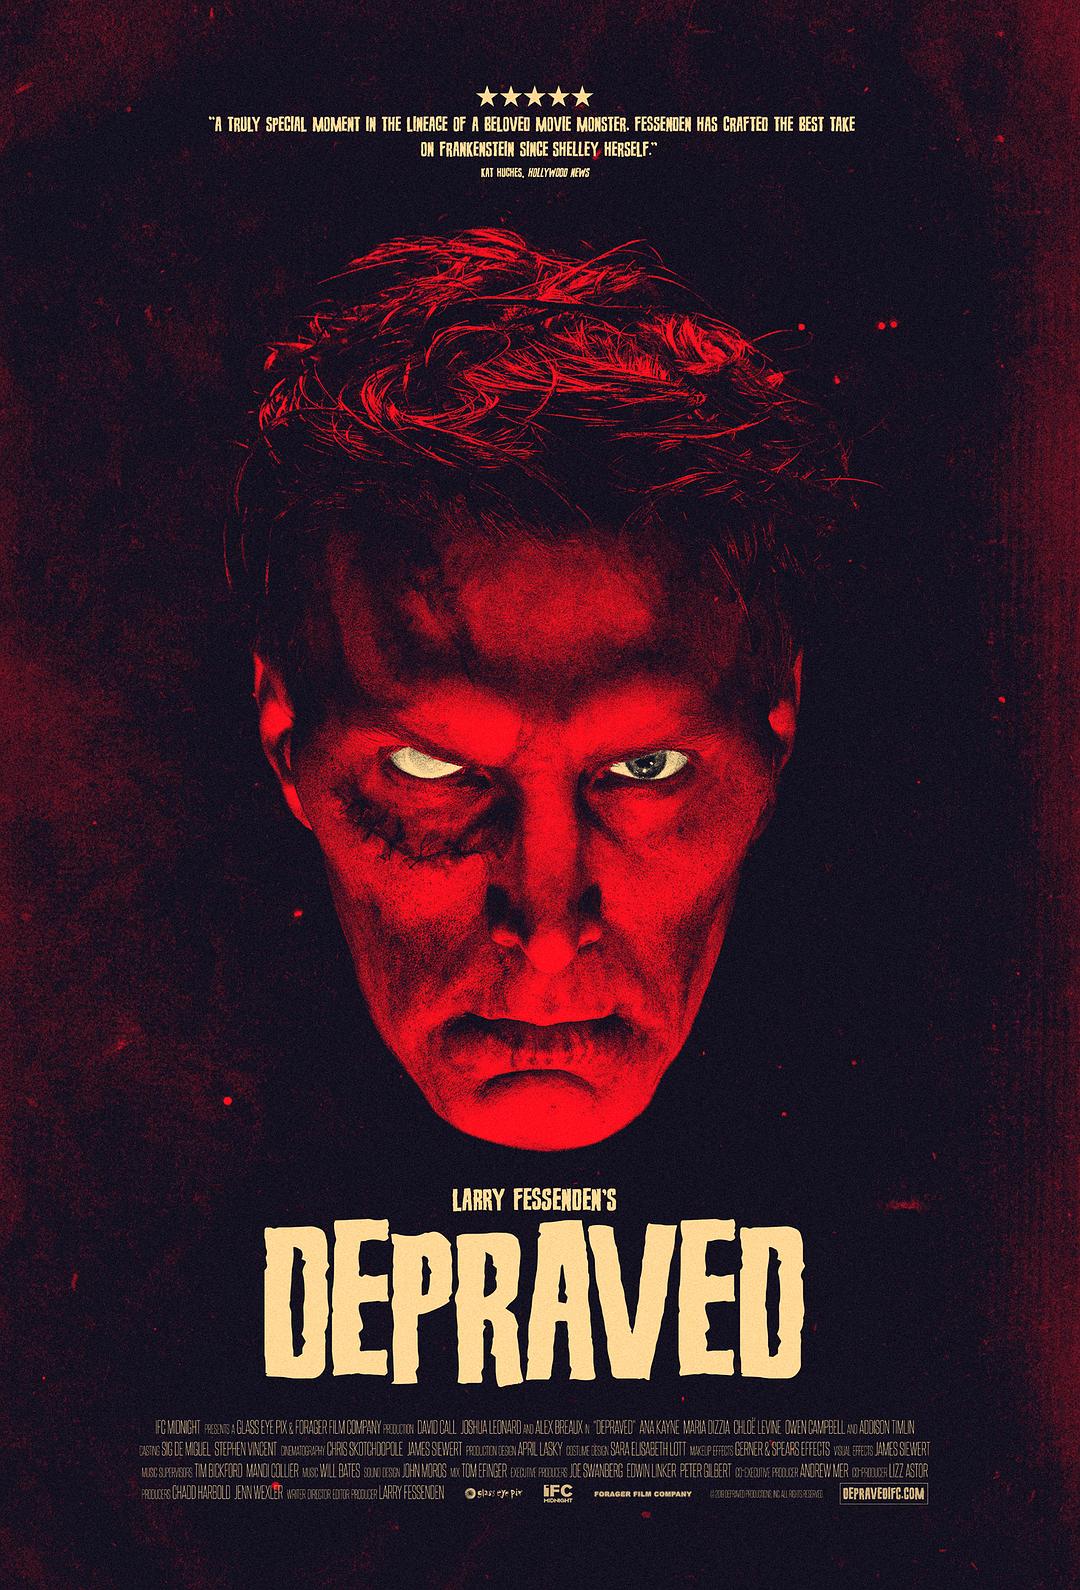  Depraved.2019.1080p.BluRay.REMUX.AVC.DTS-HD.MA.5.1-FGT 28.66GB-1.png